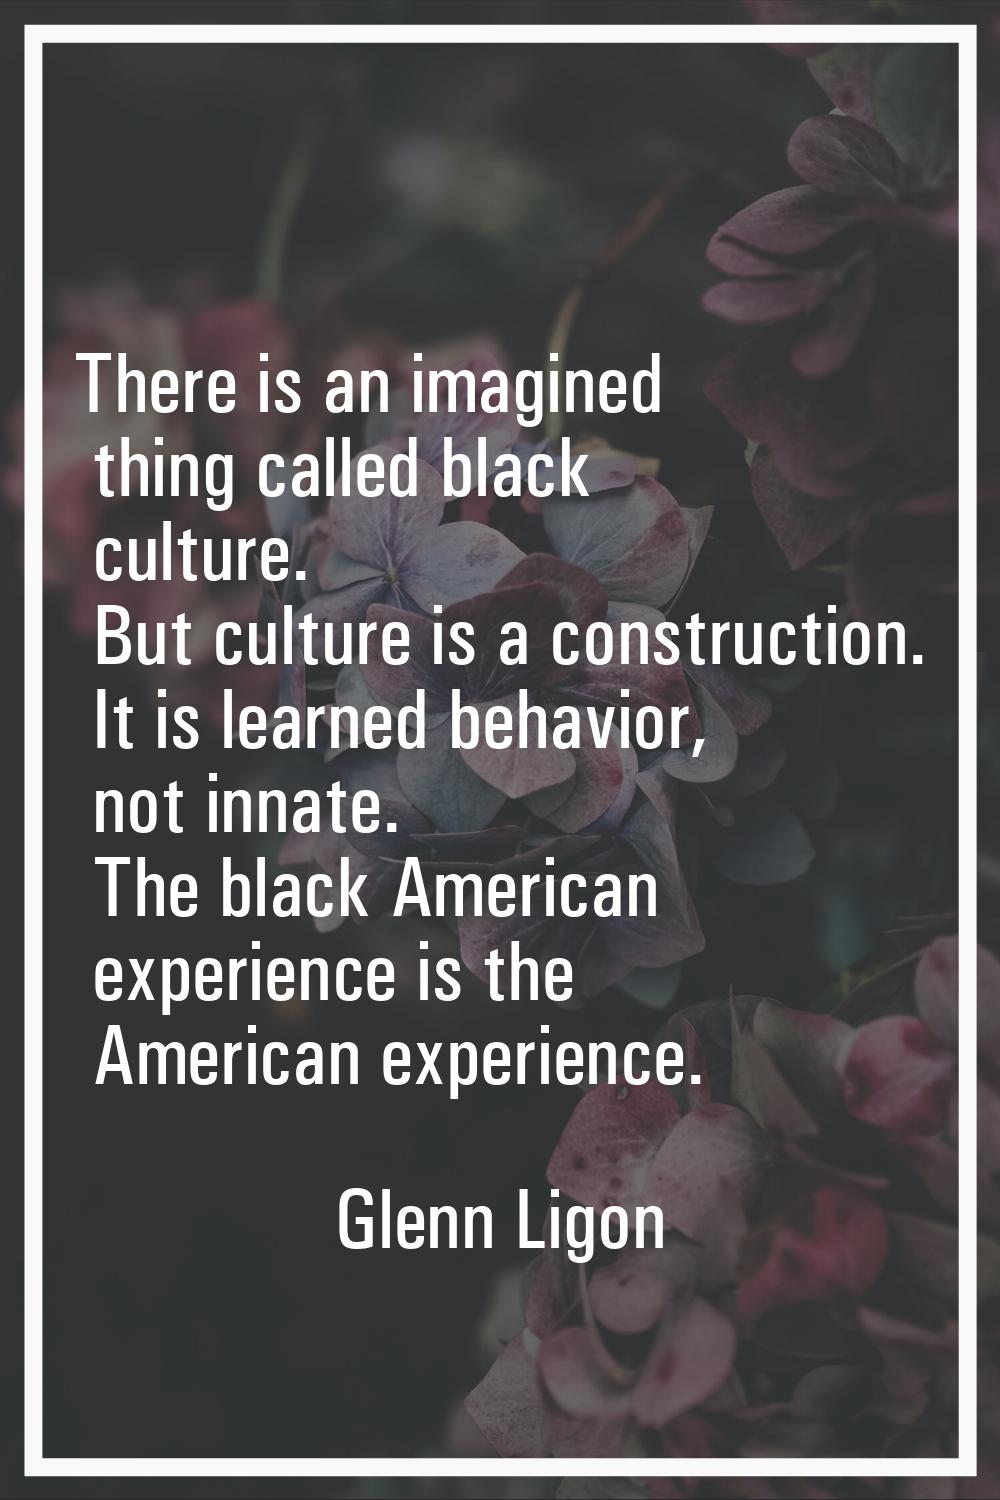 There is an imagined thing called black culture. But culture is a construction. It is learned behav